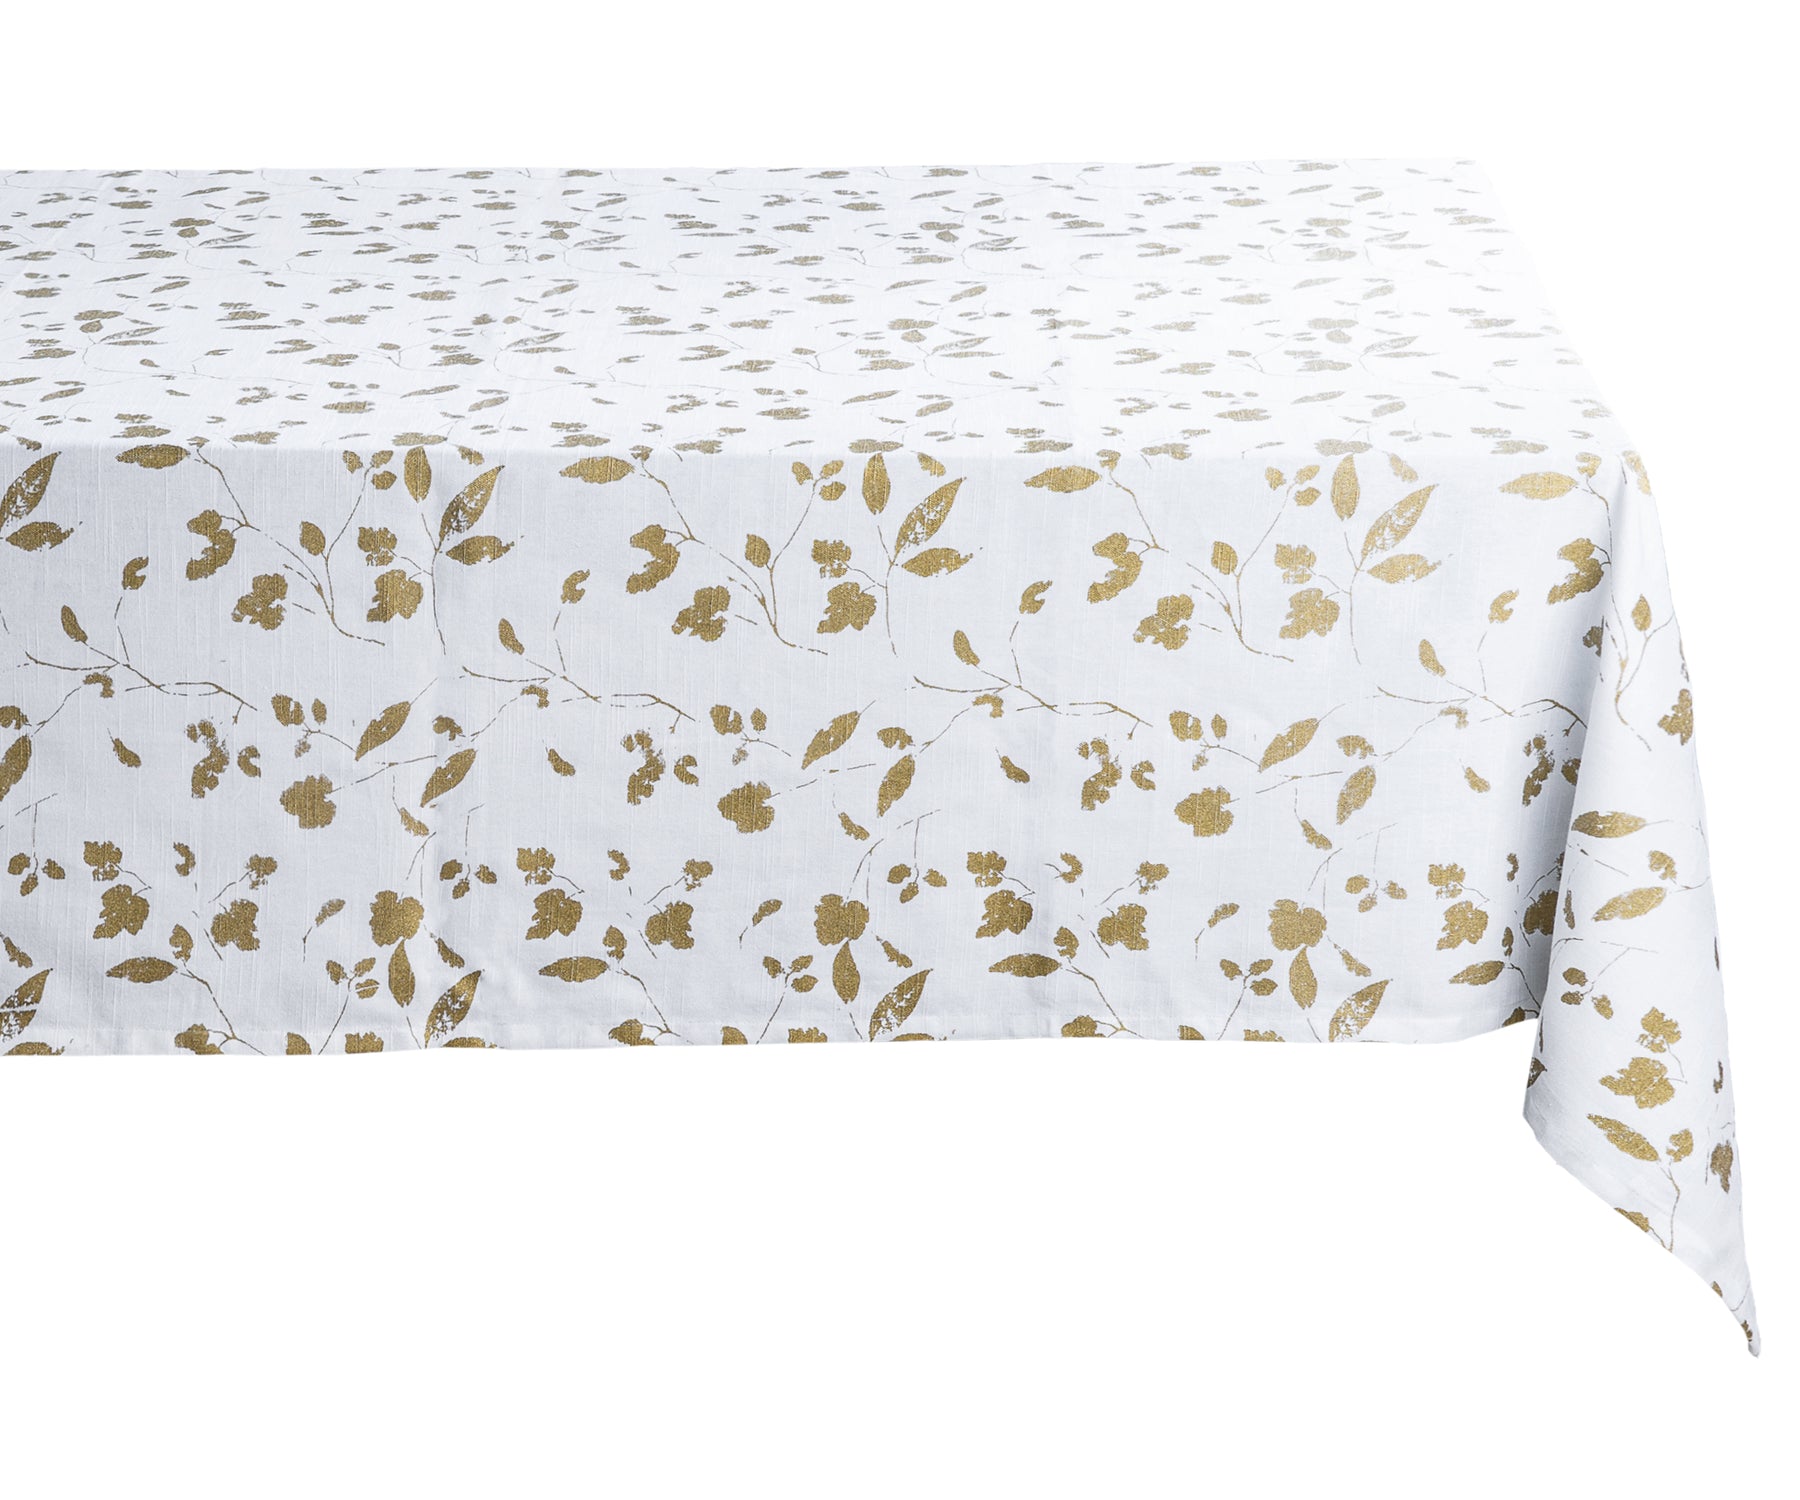 Upgrade your spring events with our gold rectangle tablecloths available in bulk, adding sophistication and style.Elegant and durable tablecloths for all occasions